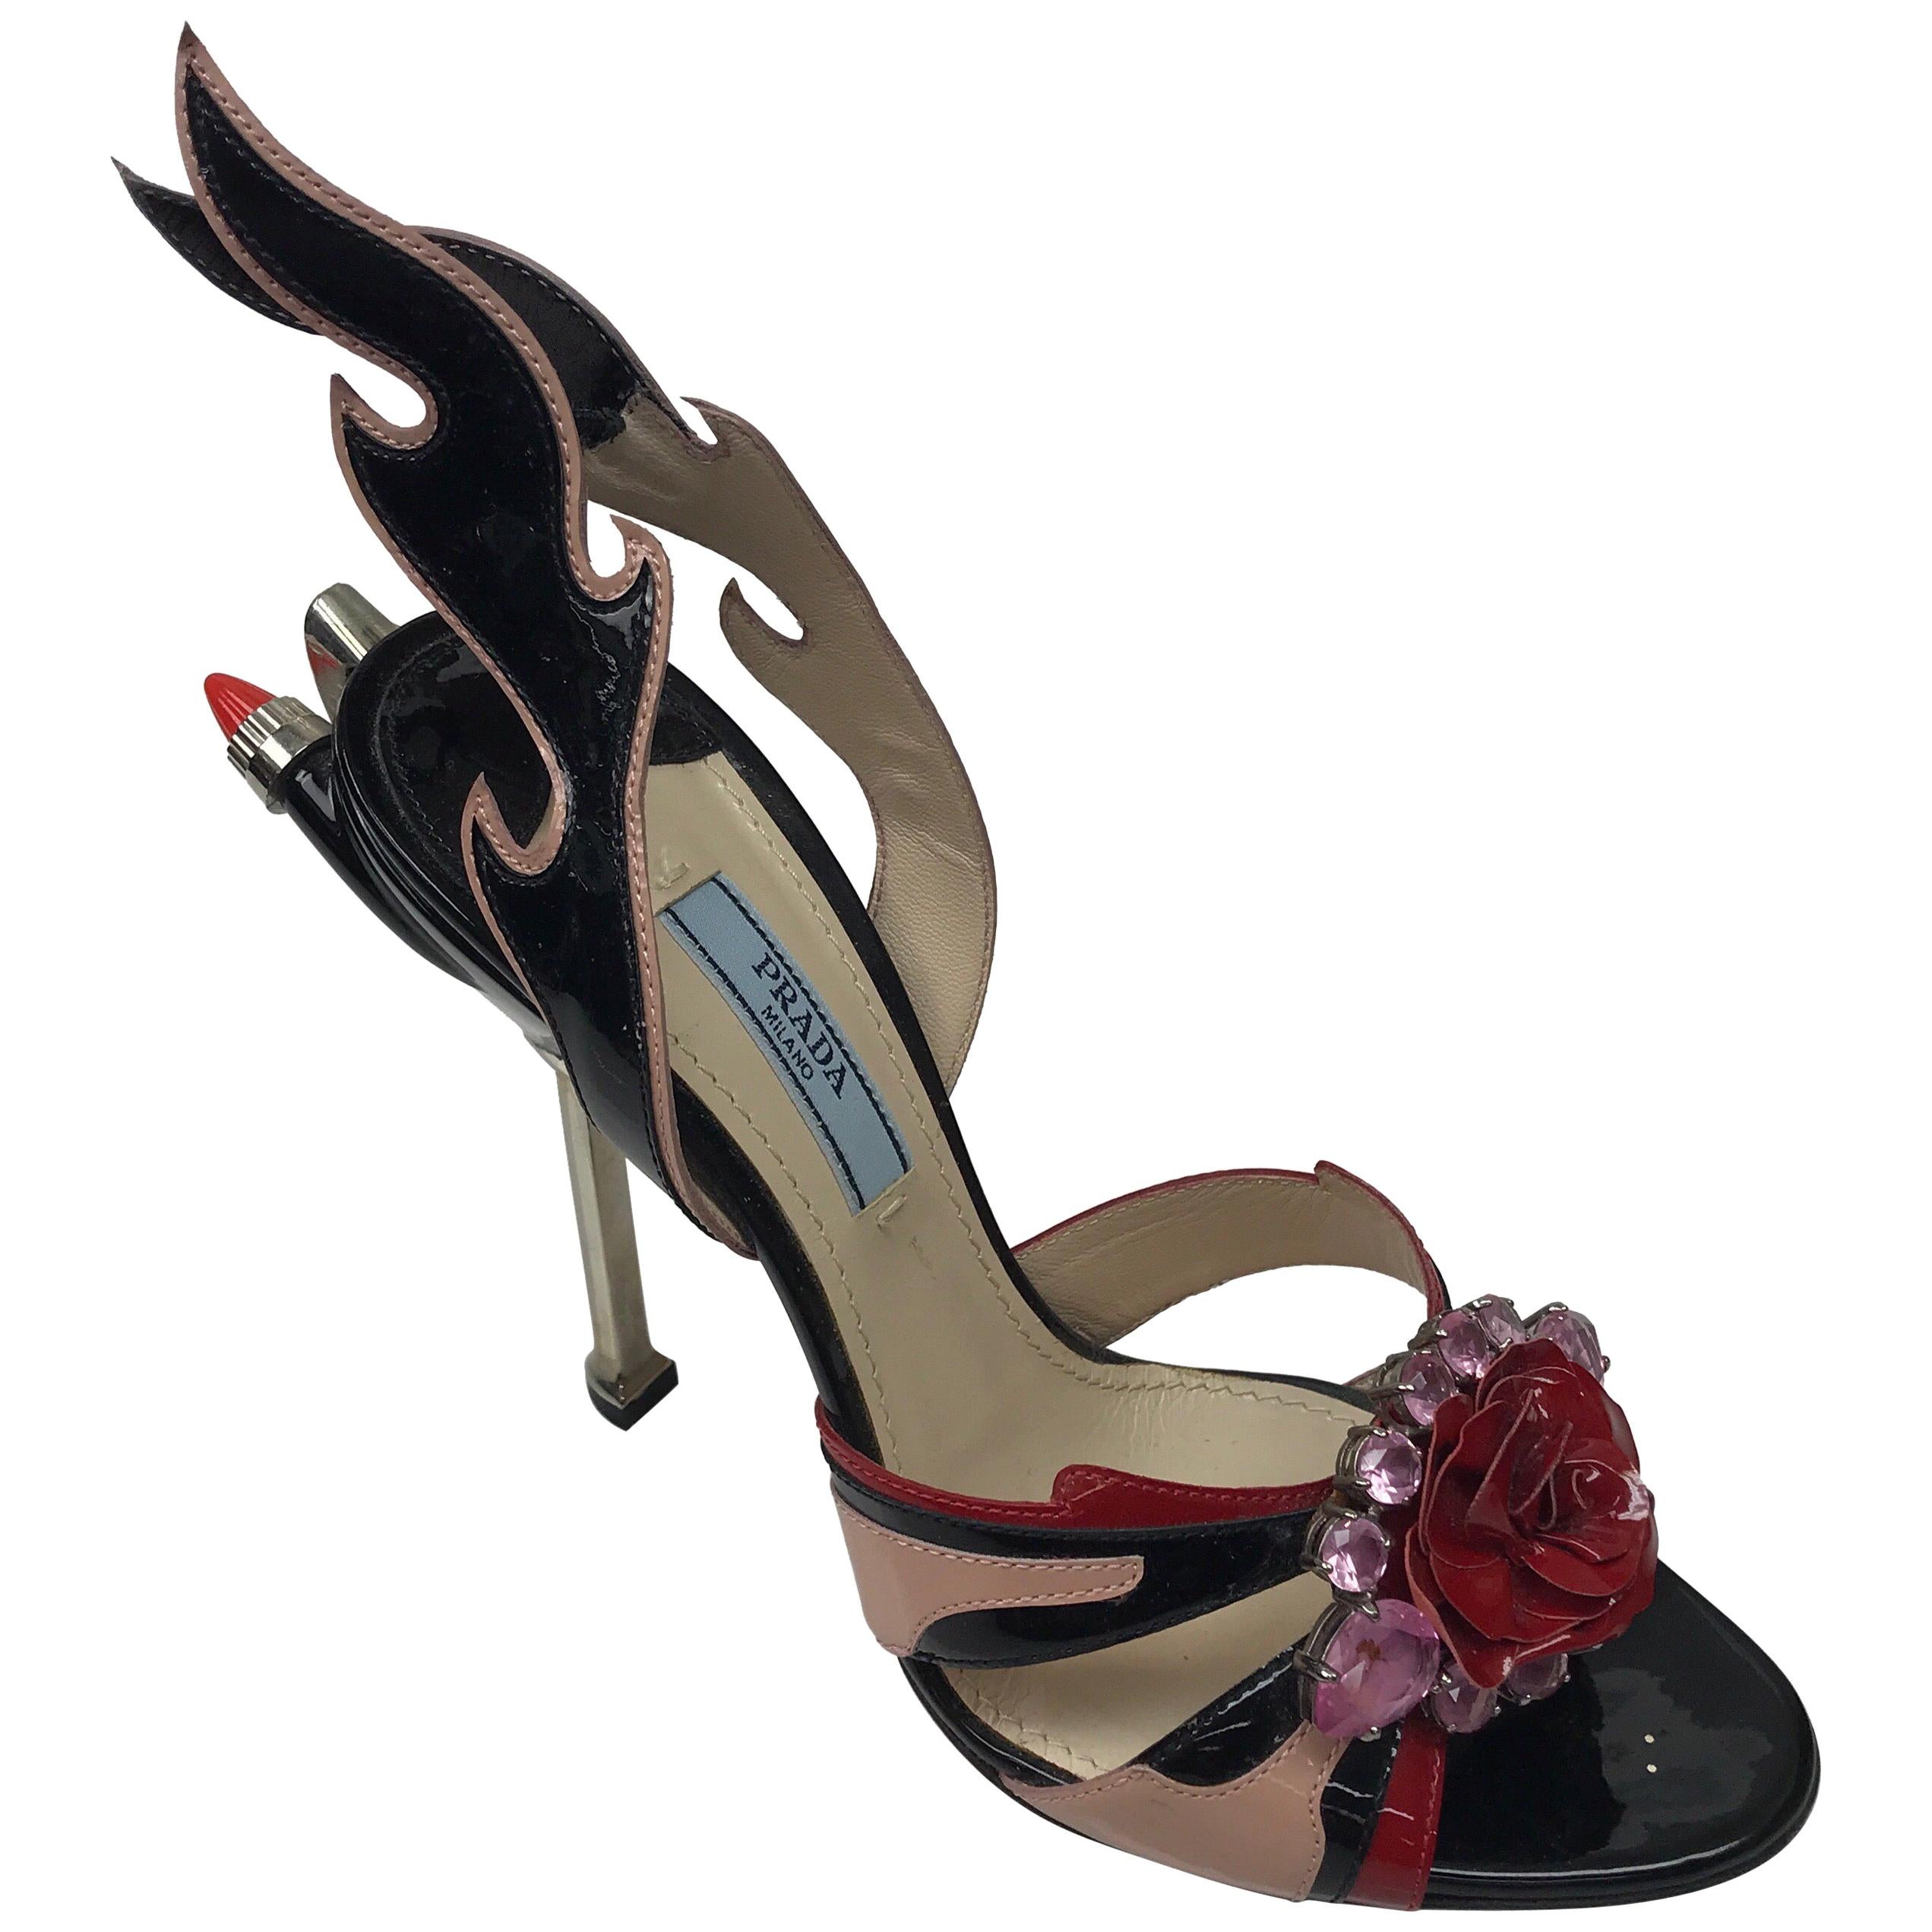 PRADA Black & Red Couture Jeweled Taillight Heels-37.5